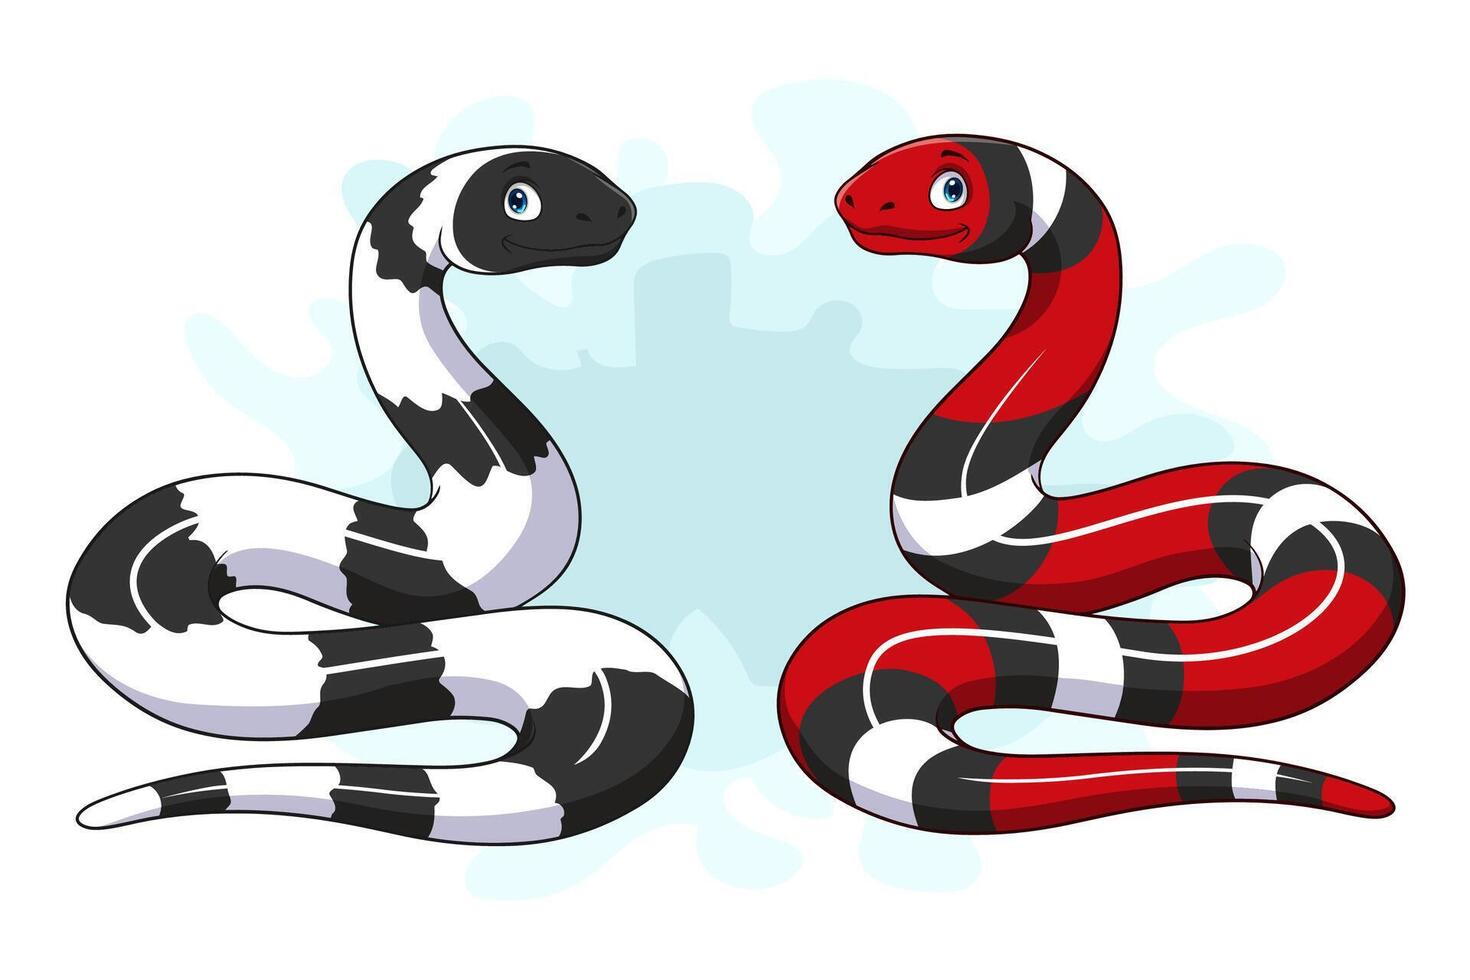 Cartoon king snake isolated on white background vector